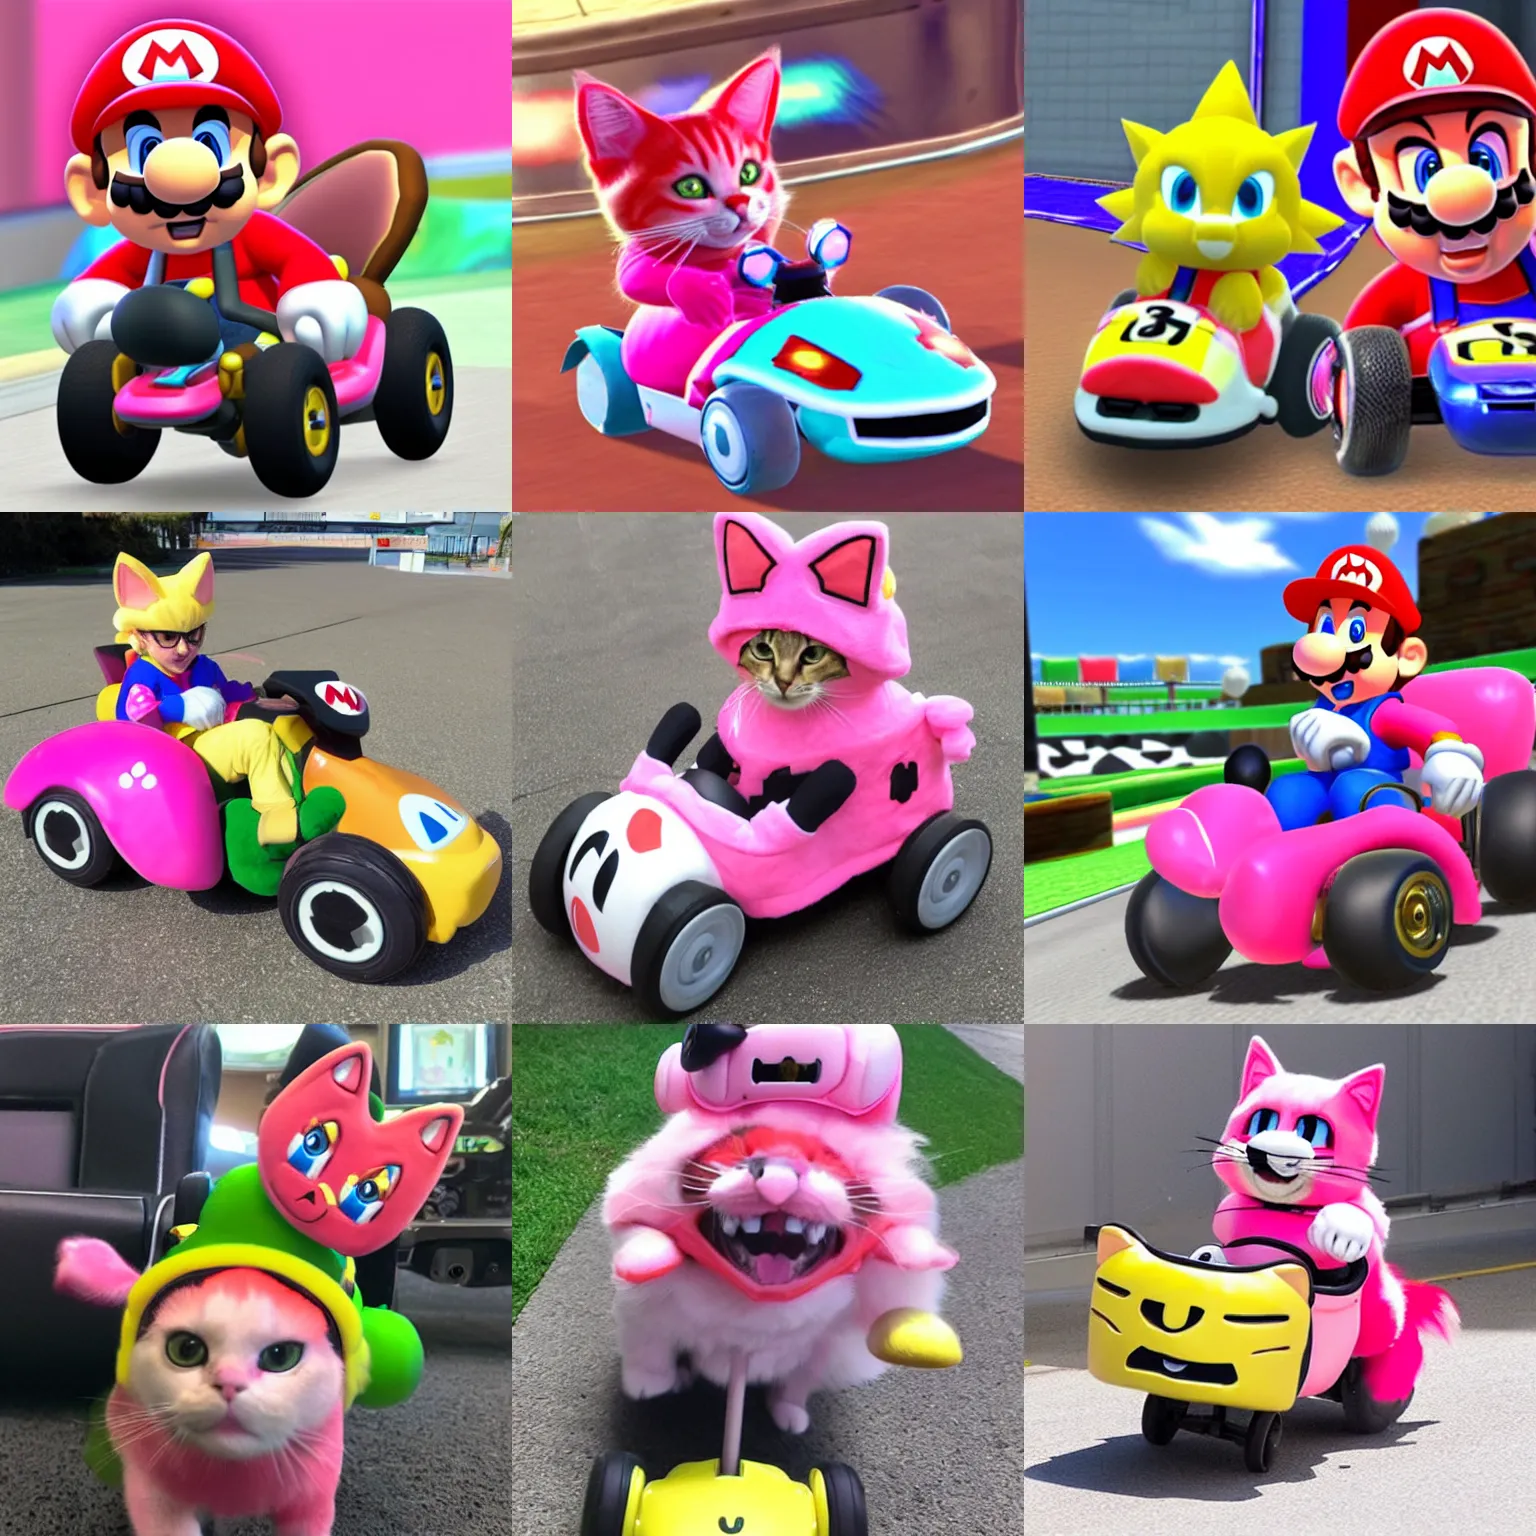 Prompt: Nintendo Mario Kart 8 cat costume cat peach driving a kart along the track as a pink cat with cat ears and tail